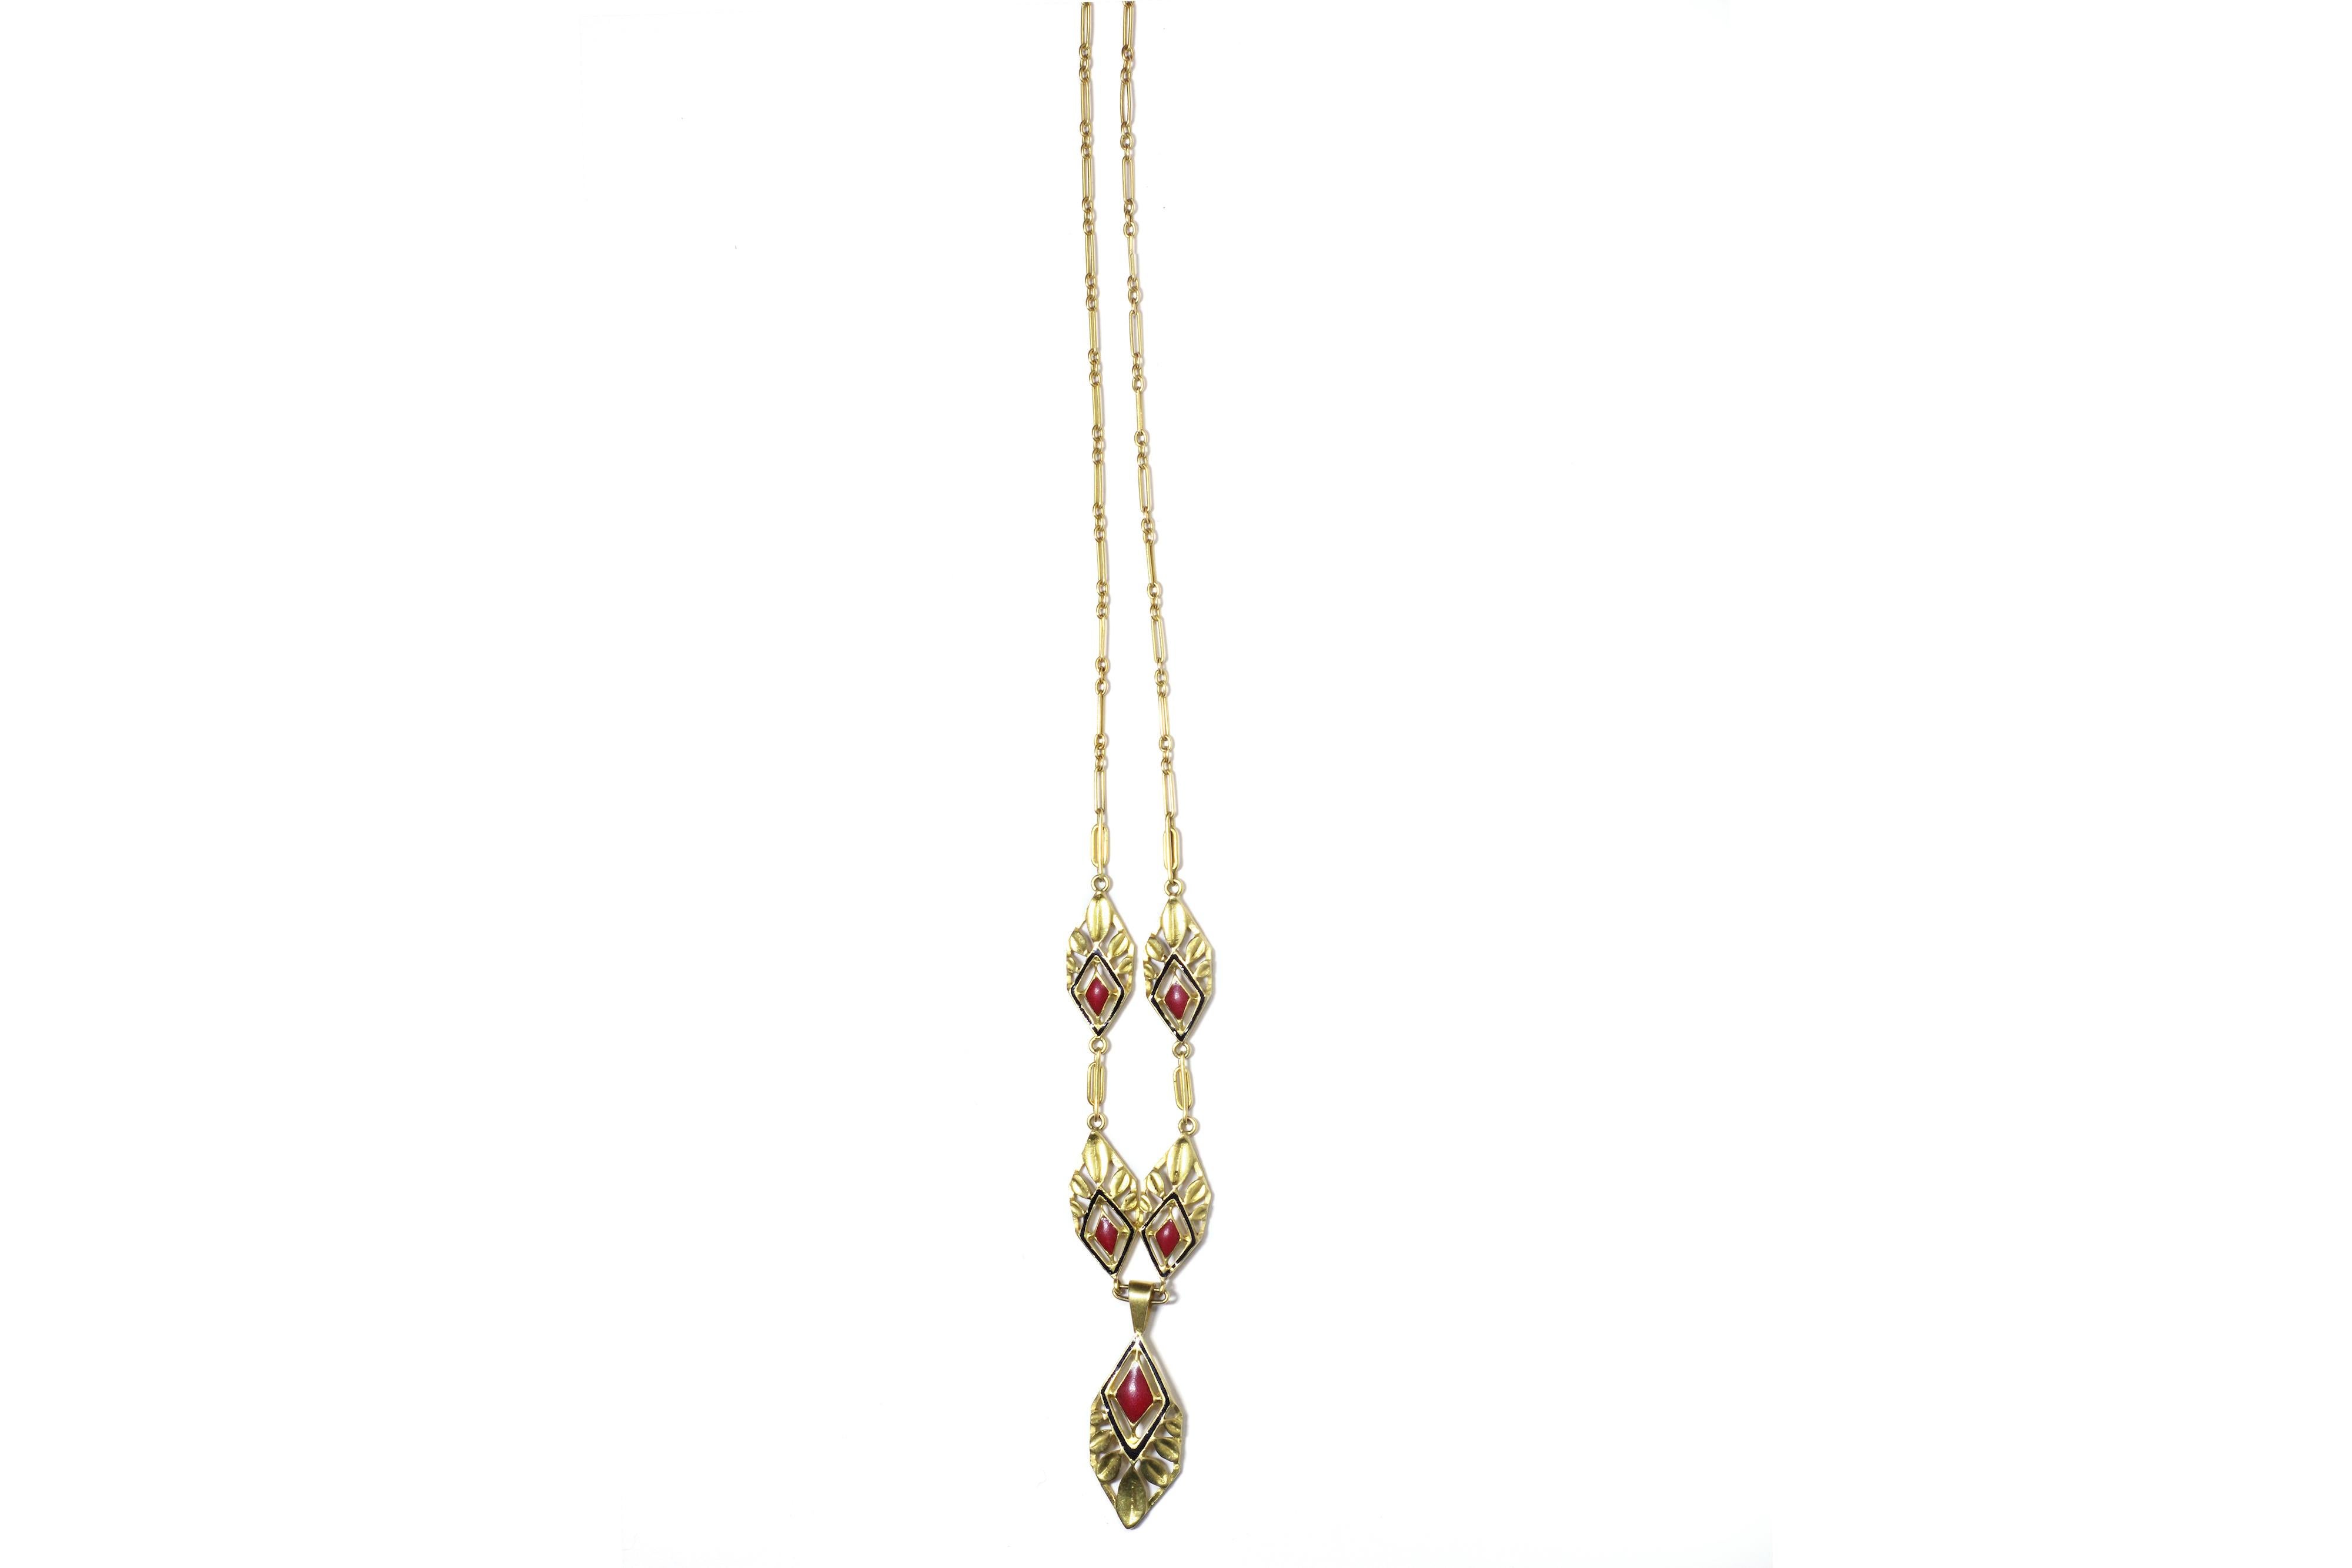 Enamel Art Deco necklace in 18k gold, Necklace called a 